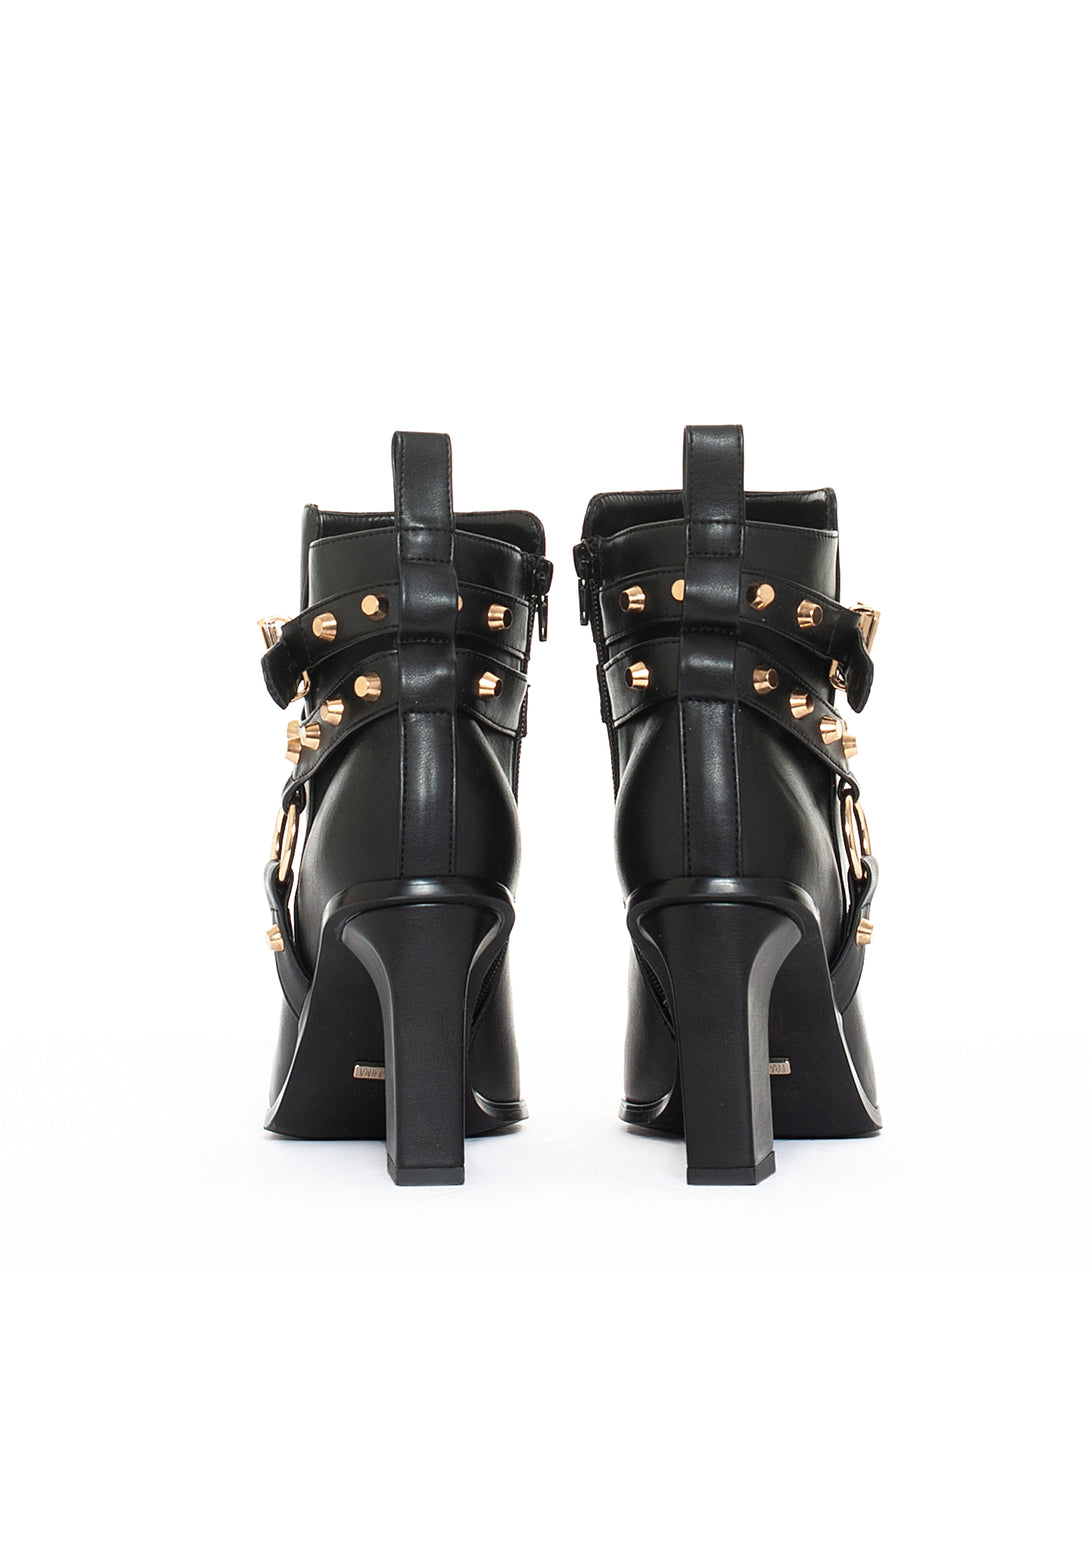 Ankle boots made in eco leather with metallic studs